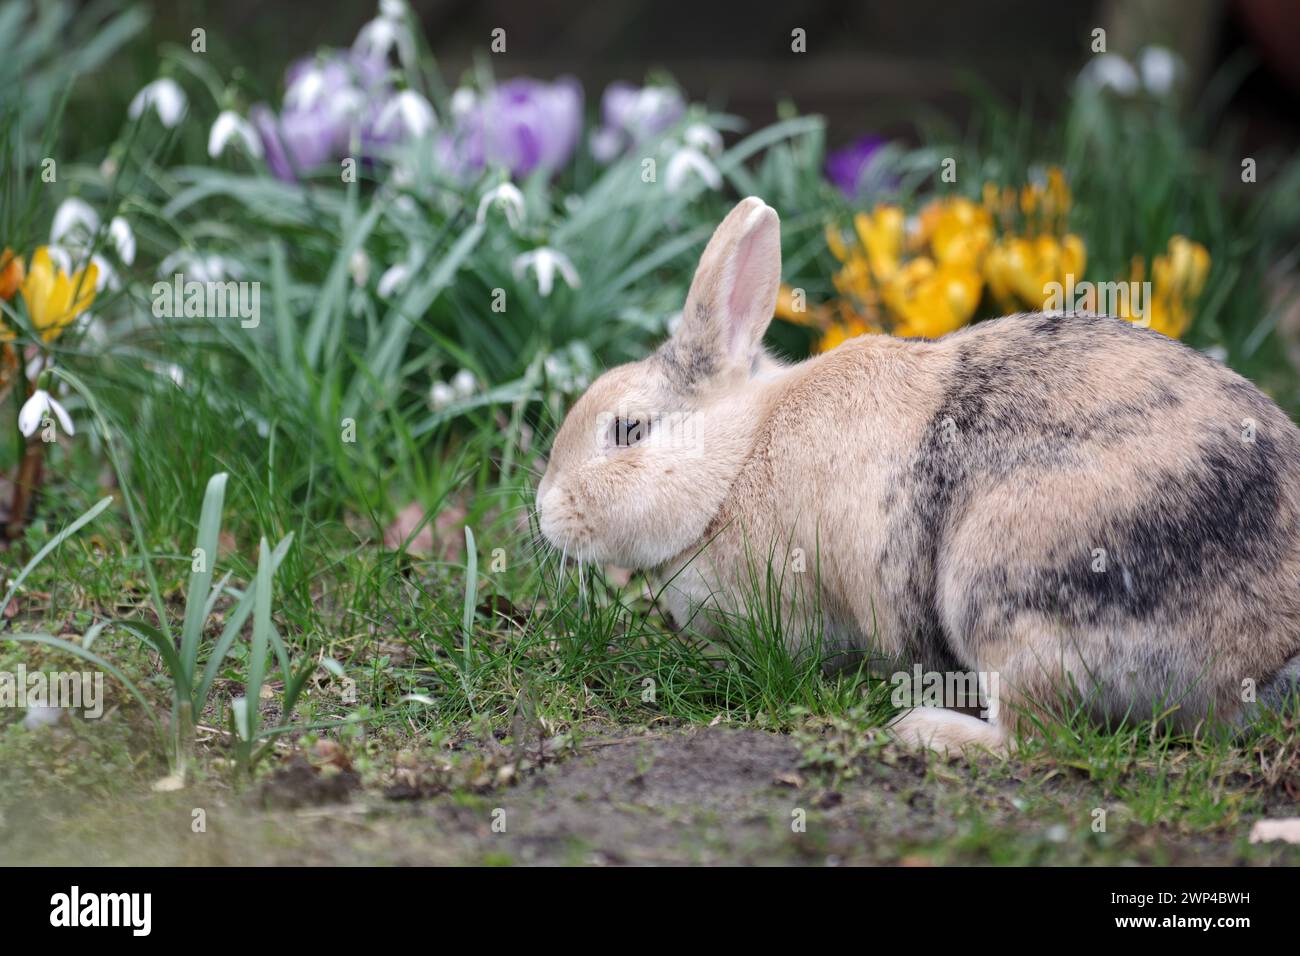 Rabbit (Oryctolagus cuniculus domestica), pet, garden, flowers, spring, Easter, A brown domestic rabbit sits in the garden in front of blooming Stock Photo